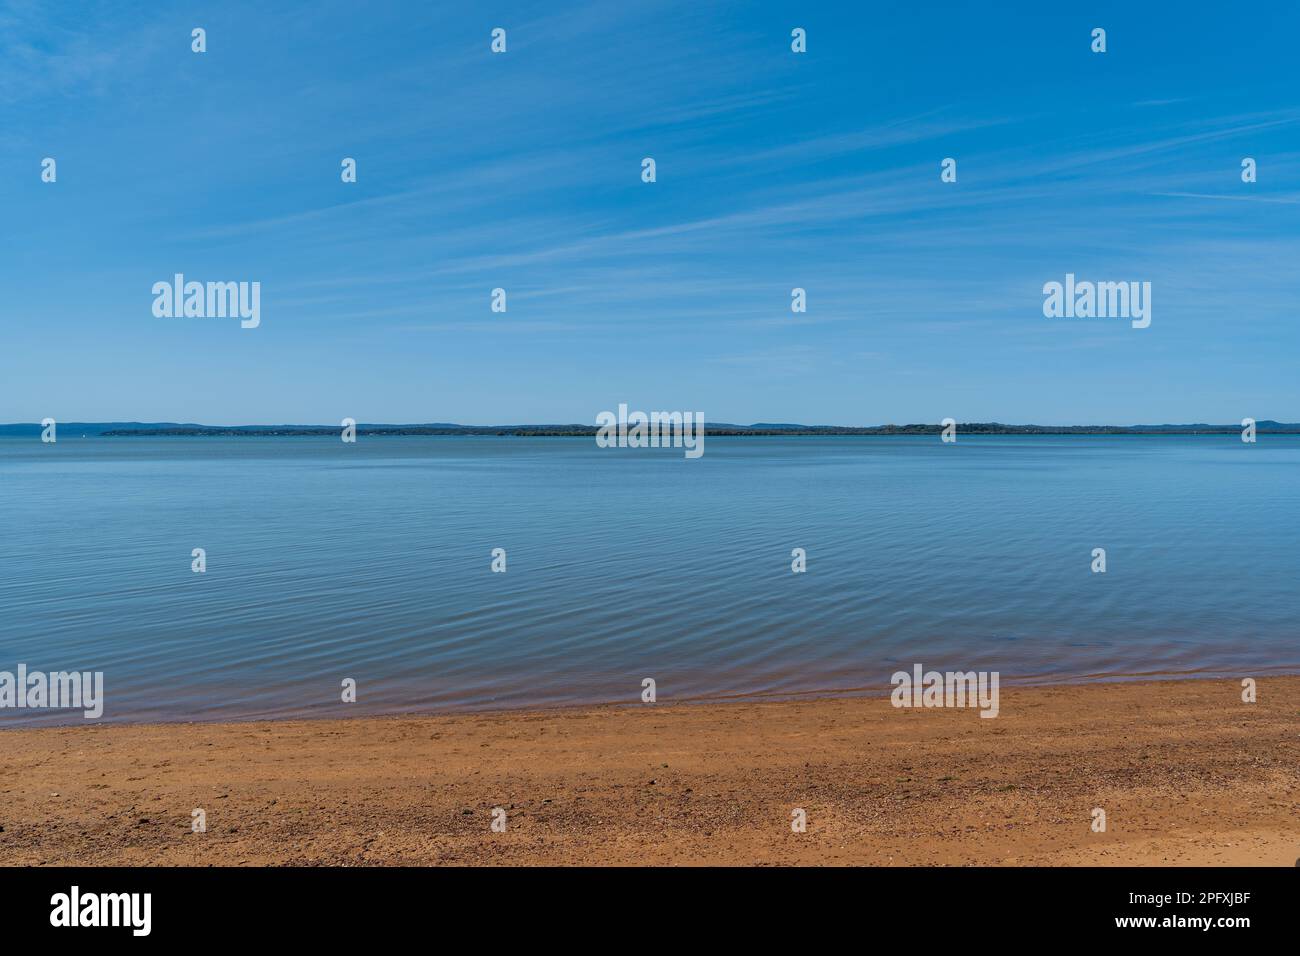 View from Redland Bay across smooth, calm water, to southern Moreton Bay islands on the horizon, under a beautiful blue sky with cirrostratus clouds Stock Photo